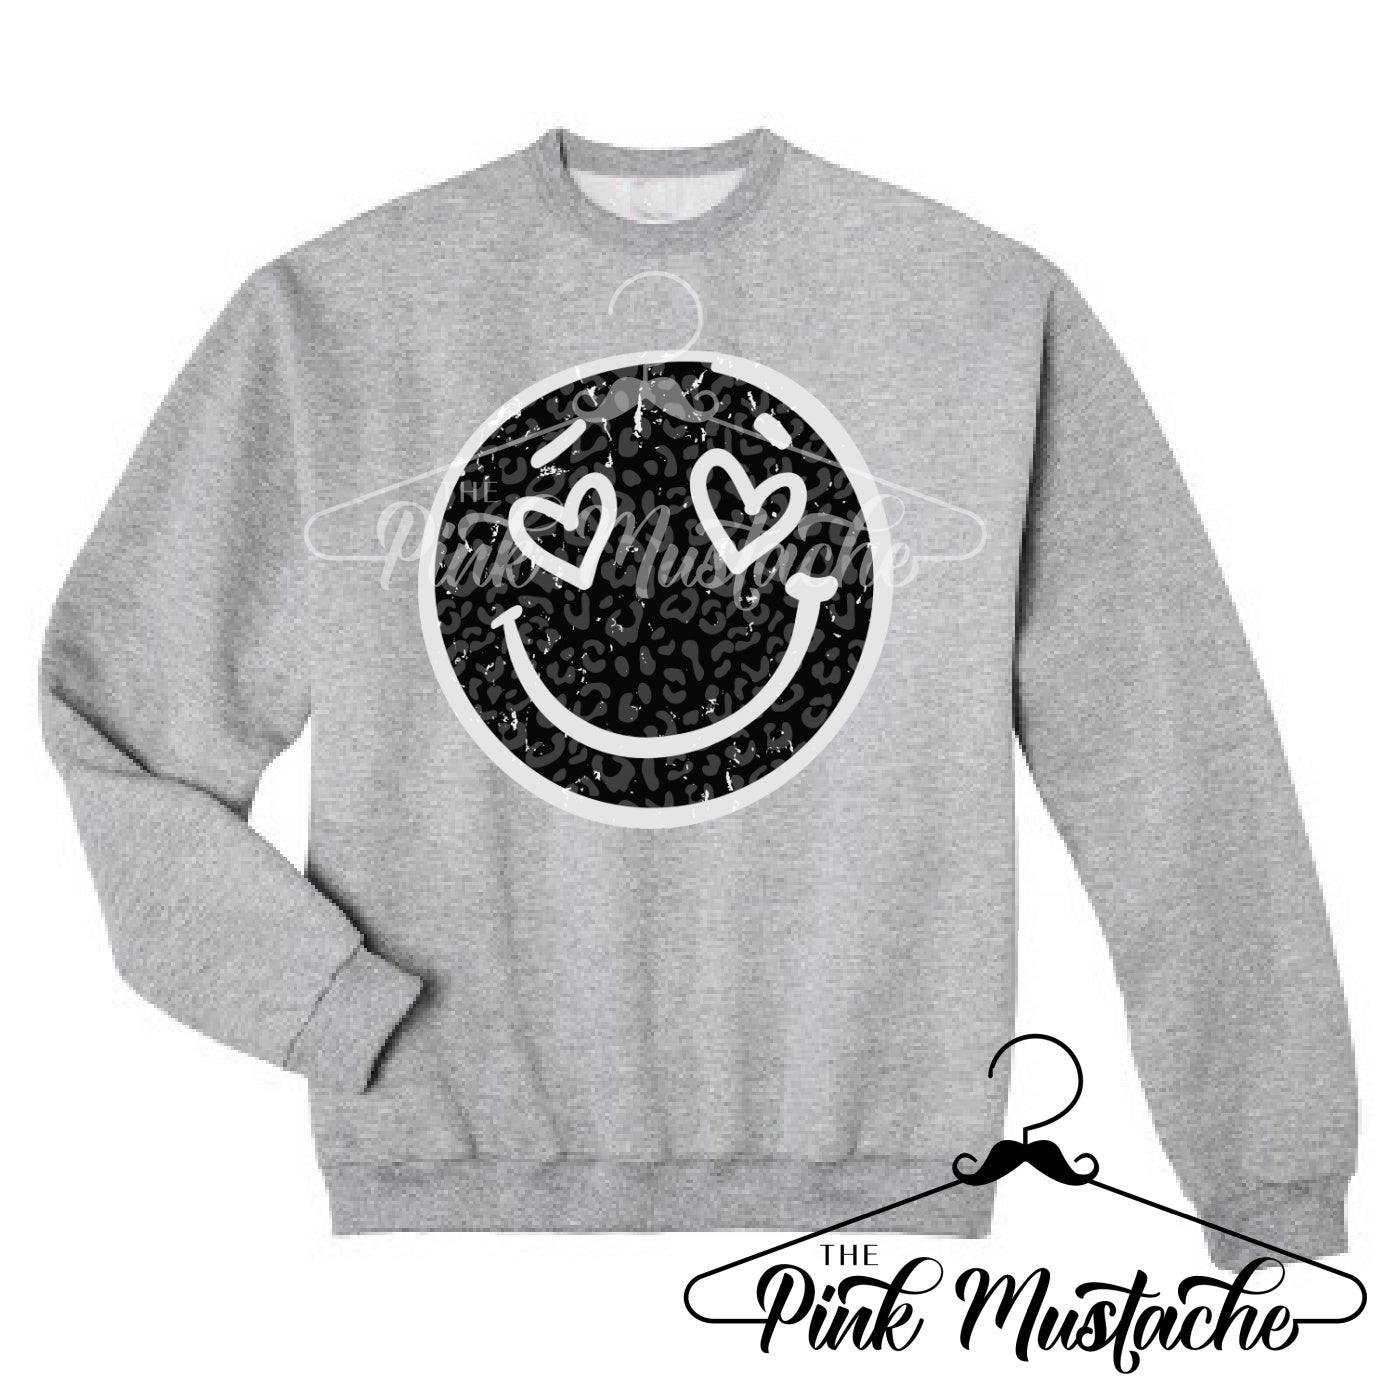 Black Leopard Distressed Smiley Face Sweatshirt/ Super Cute Unisex Sized Sweatshirt/ Youth and Adult Options